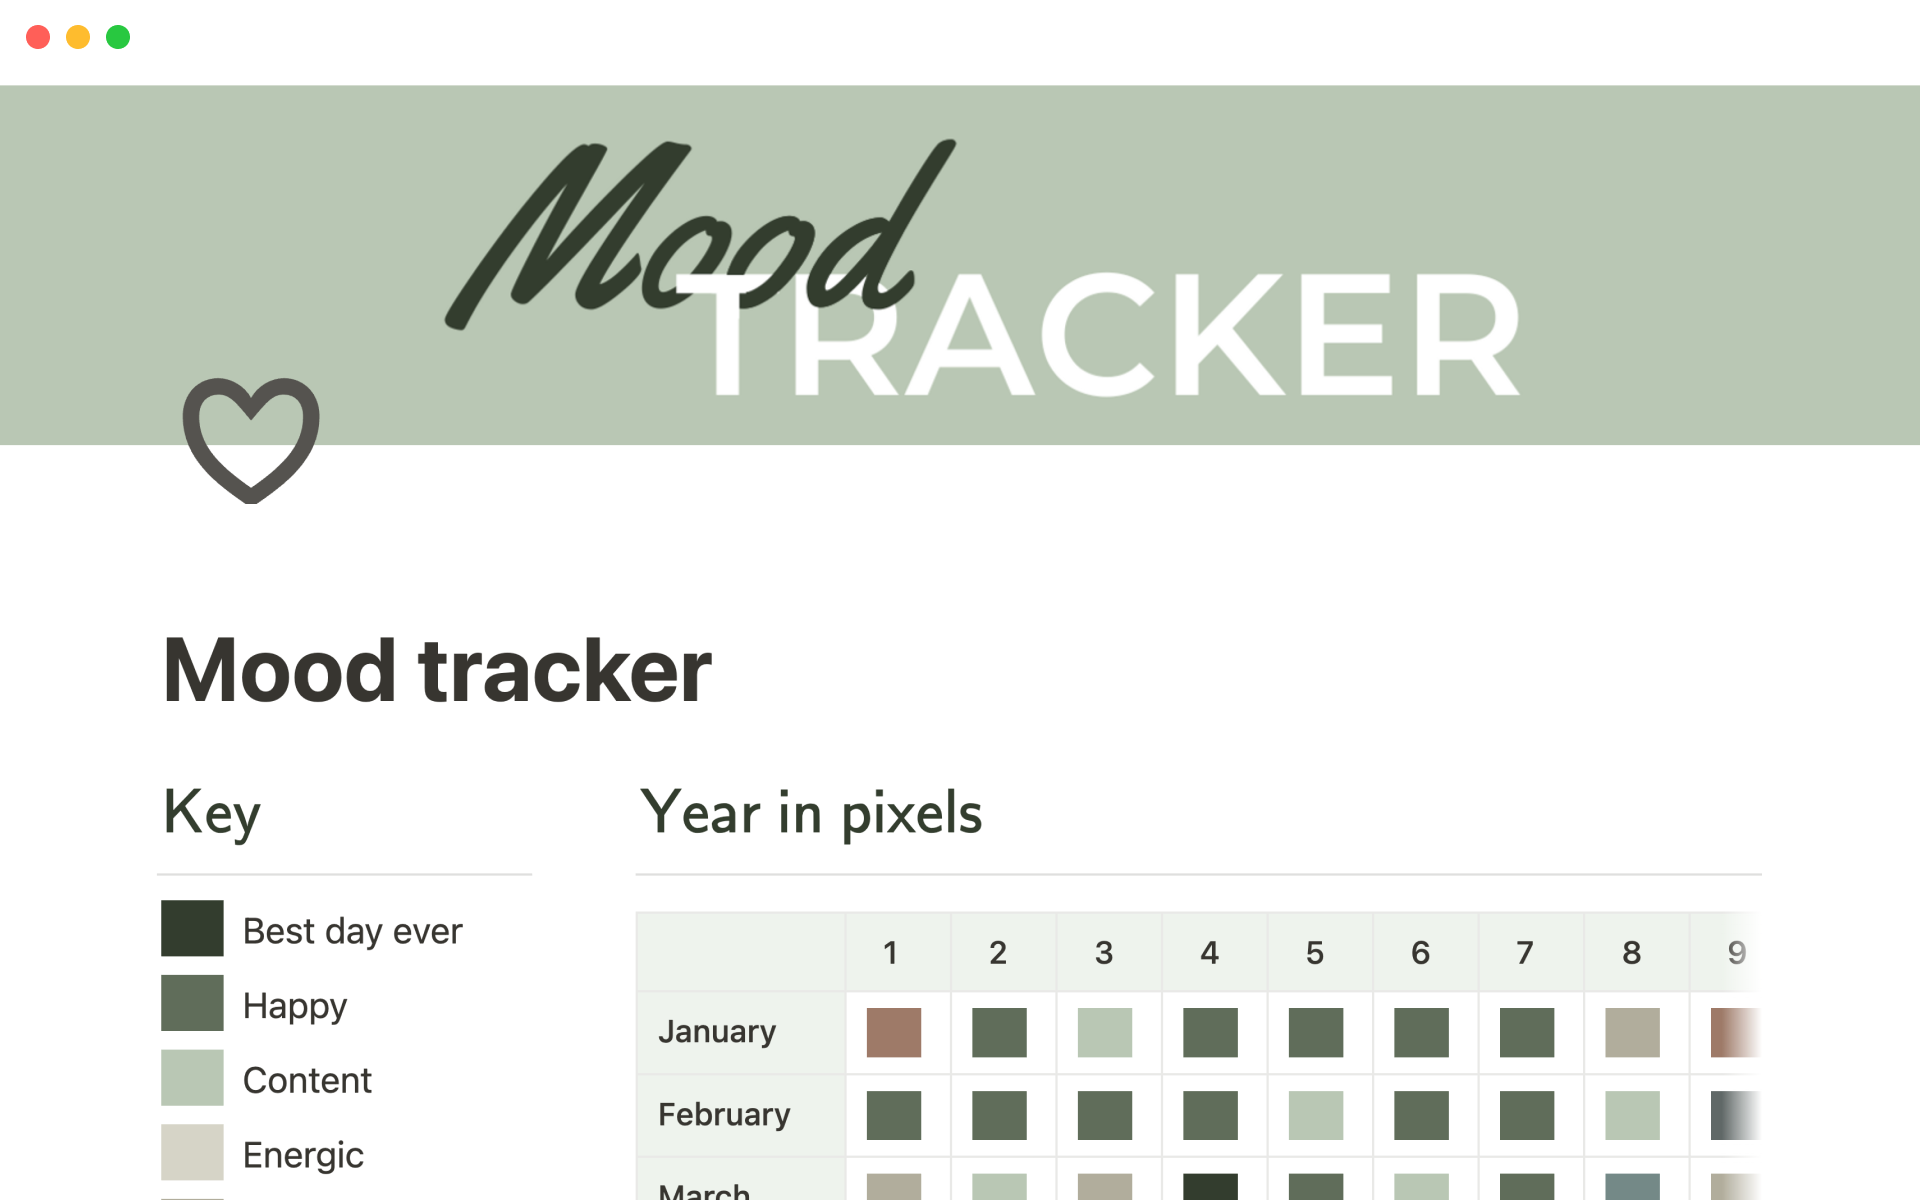 Keep track of your mood on a daily basis with this aesthetic template